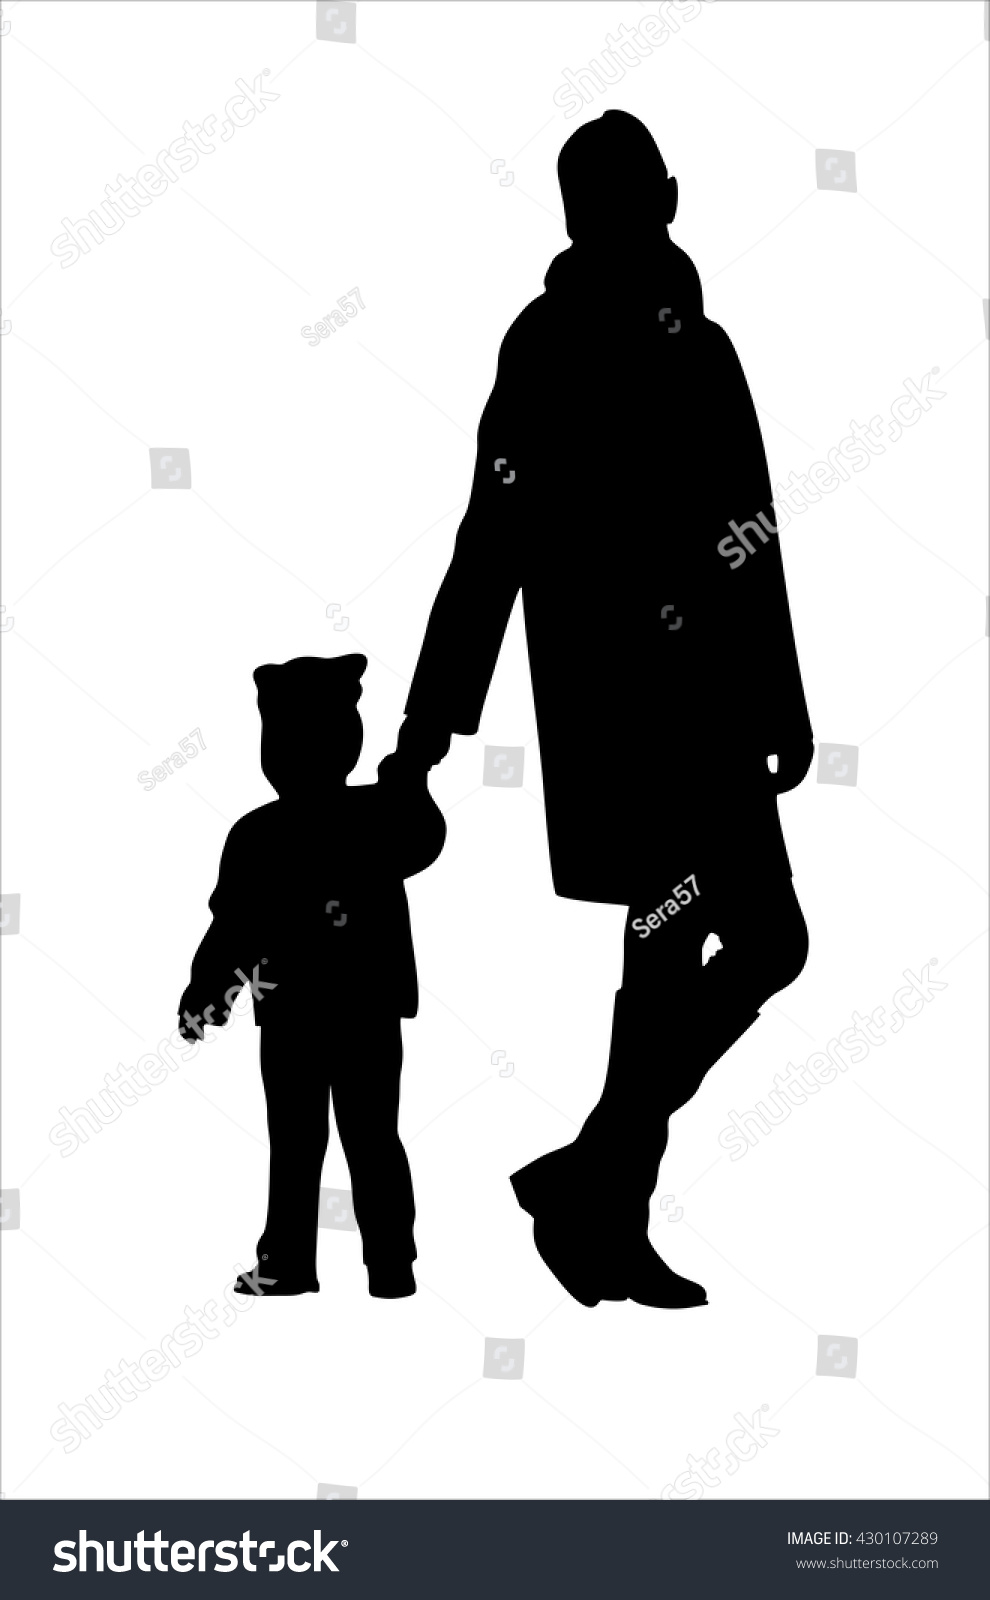 Download Silhouette Mother Daughter Stock Vector 430107289 ...